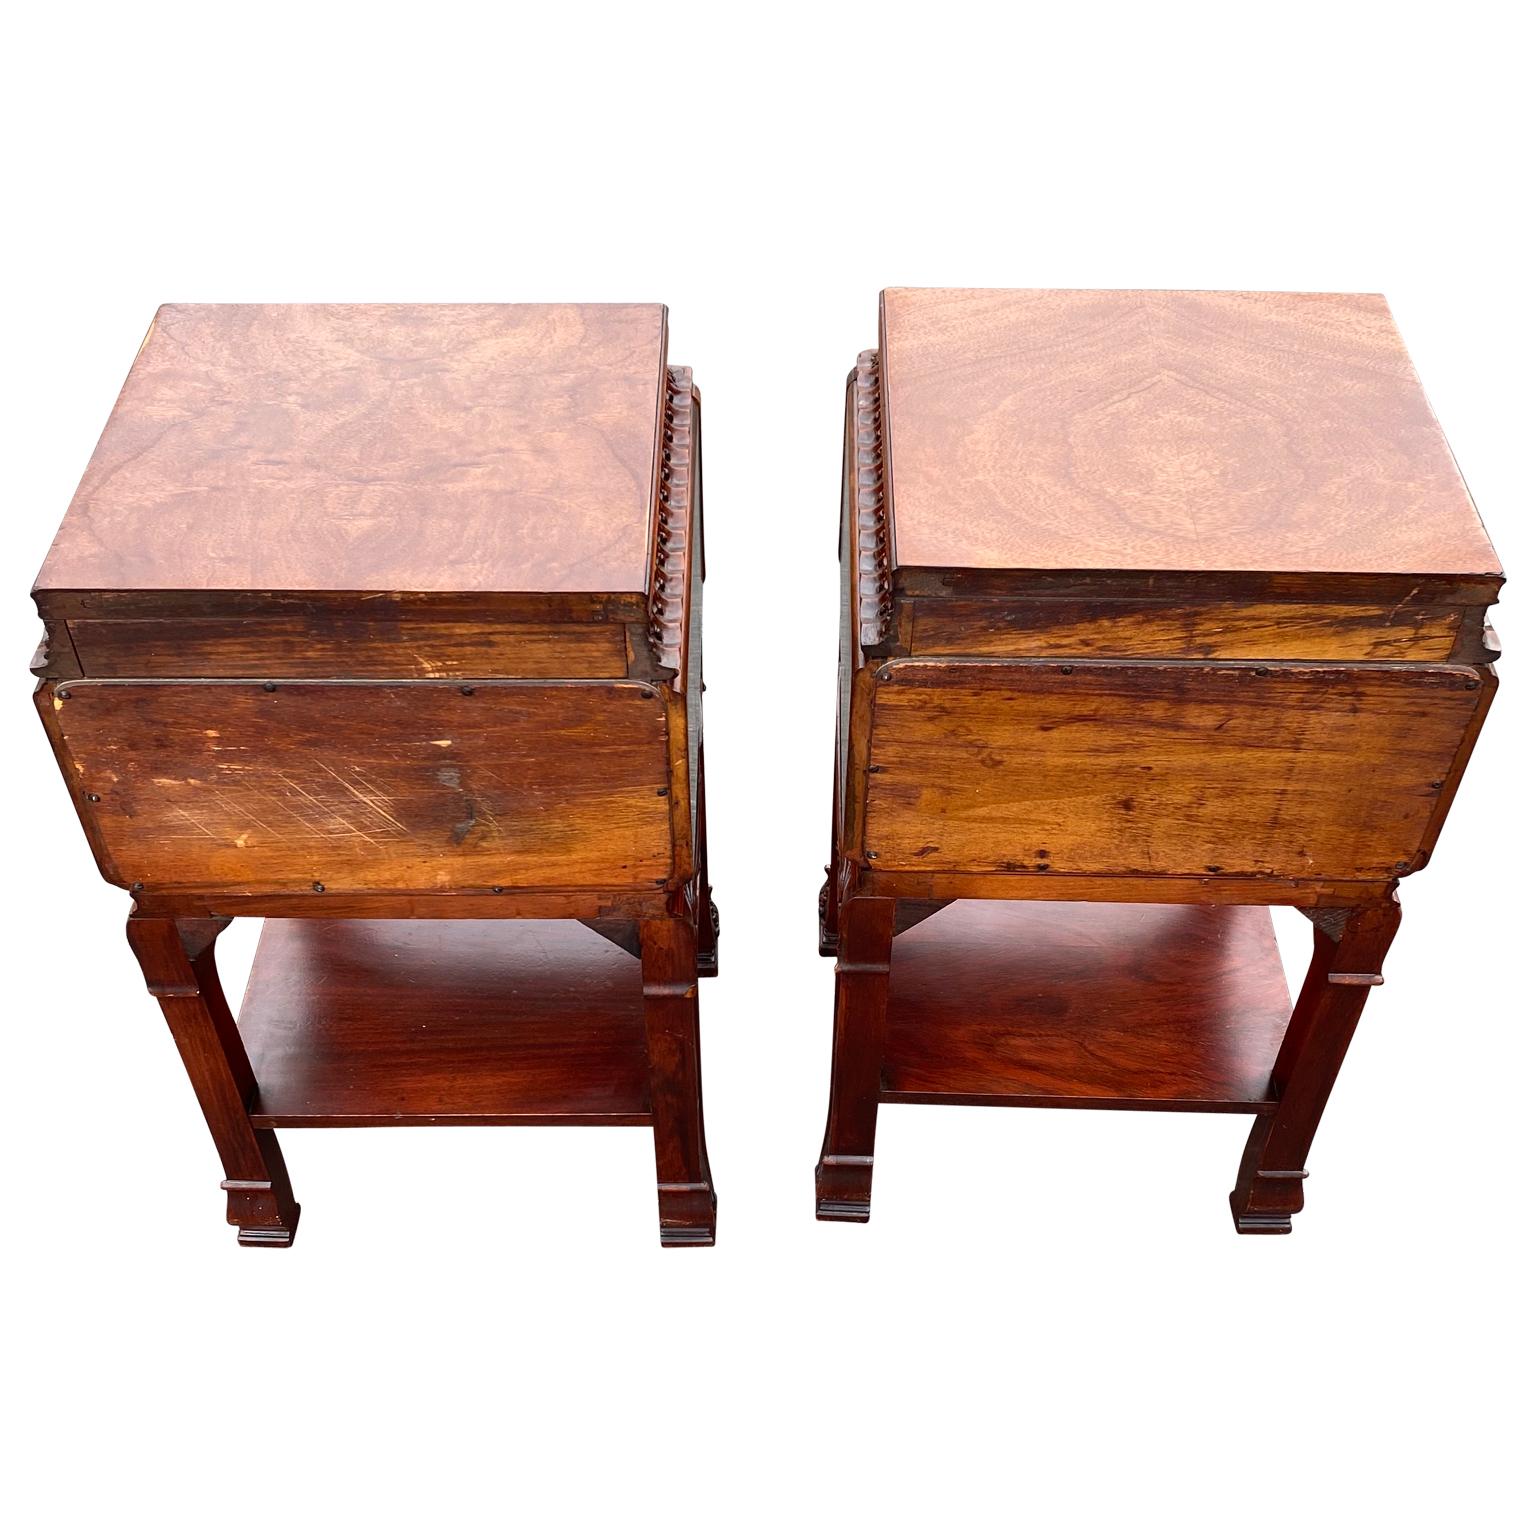 20th Century Pair Of Chinese Chippendale Nightstands Tables Or Cabinets